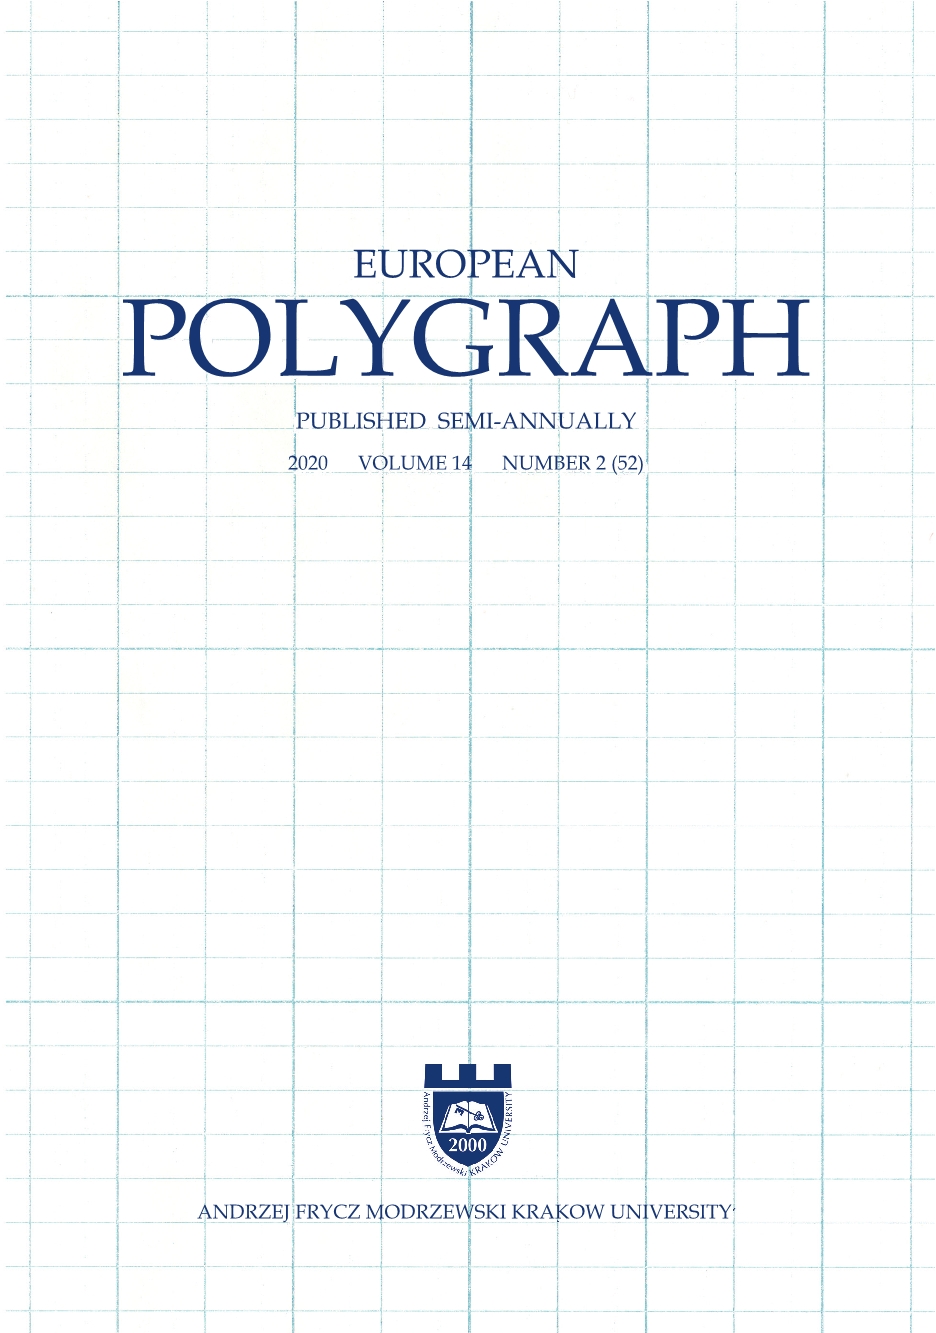 Polygraph: The Use of Polygraphy in the Assessment and Treatment of Sex Offenders in the UK Cover Image